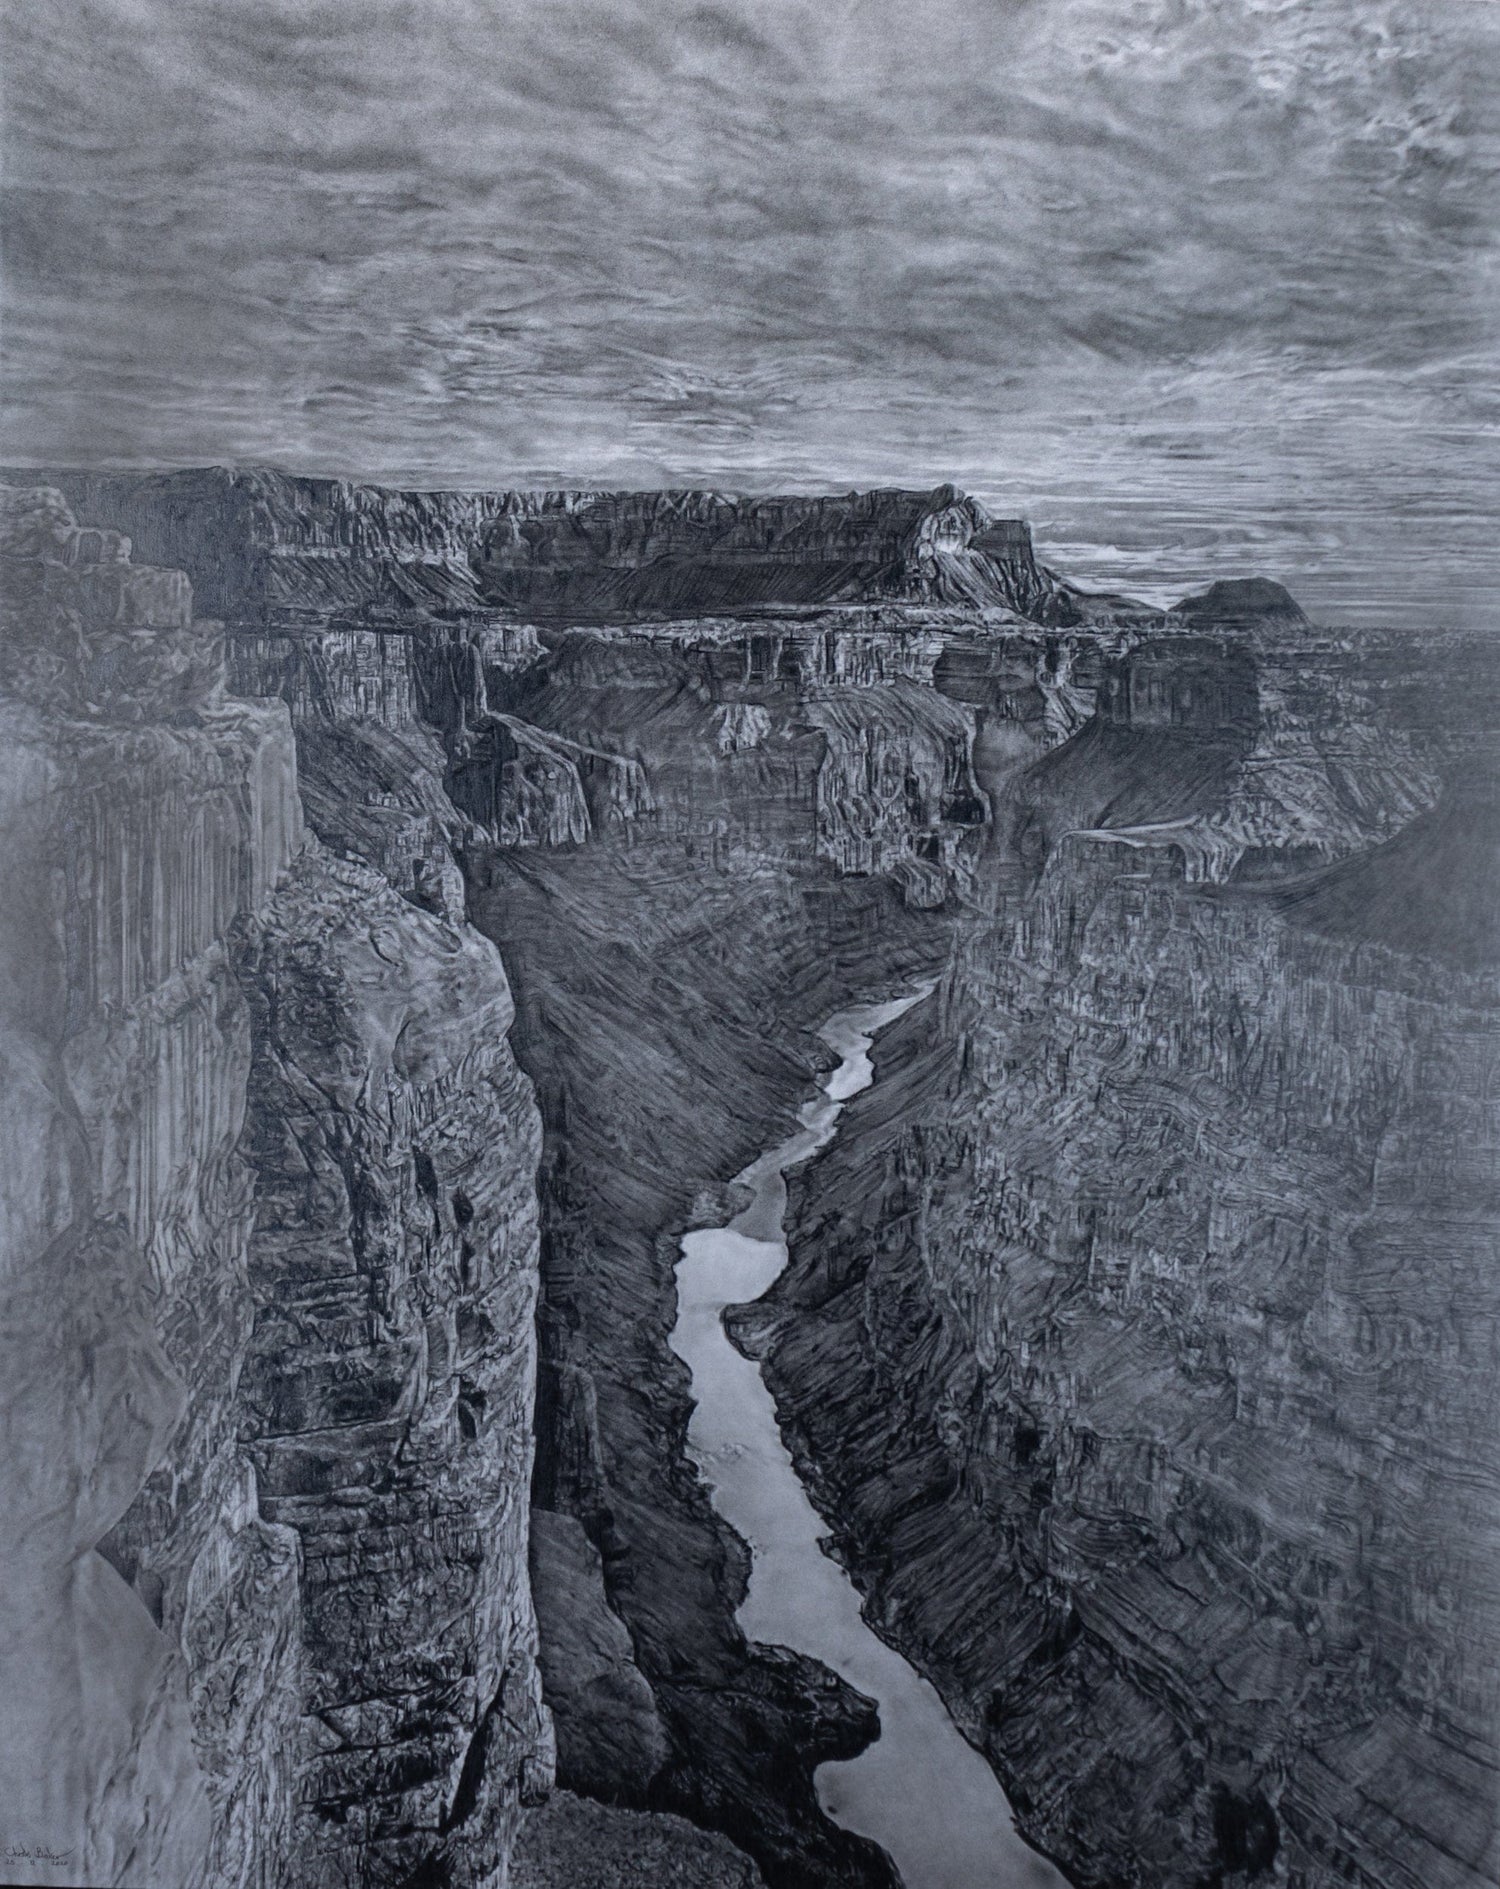 Realistic Sketch by Chris Baker of the Grand Canyon